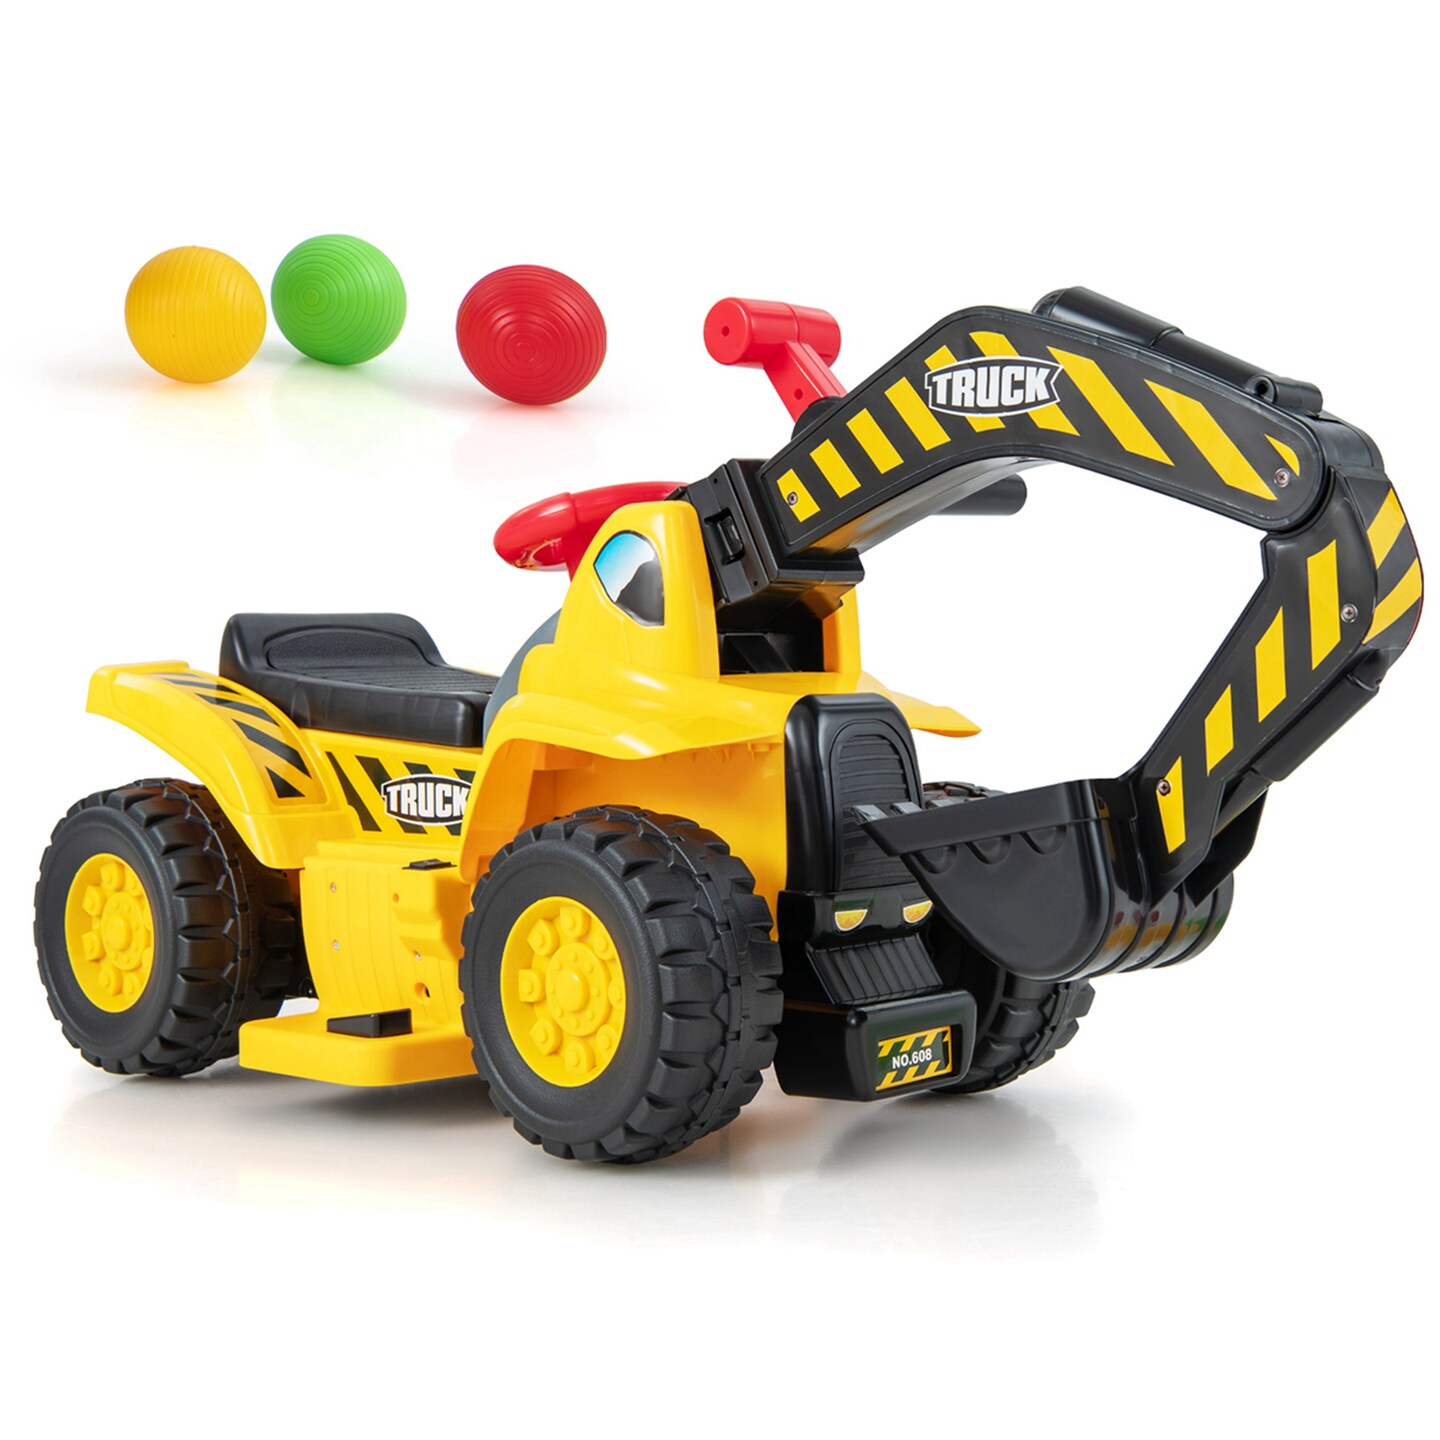 Costway 6V Electric Kids Ride On Excavator Pretend Play Toy Tractor w/ Basketball Hoop